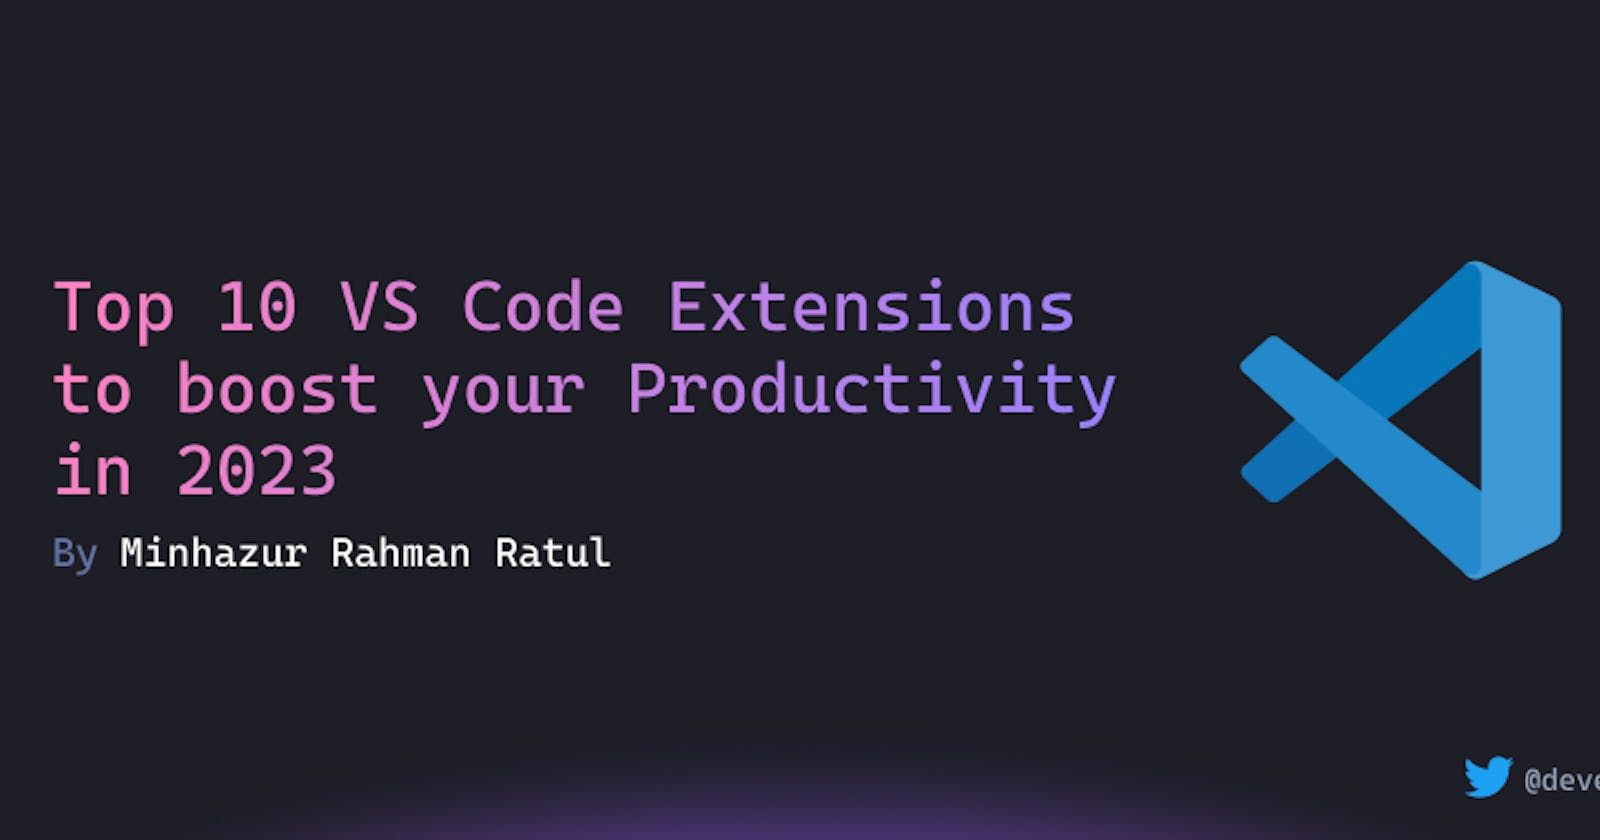 Top 10 VS Code Extensions to boost your Productivity in 2023